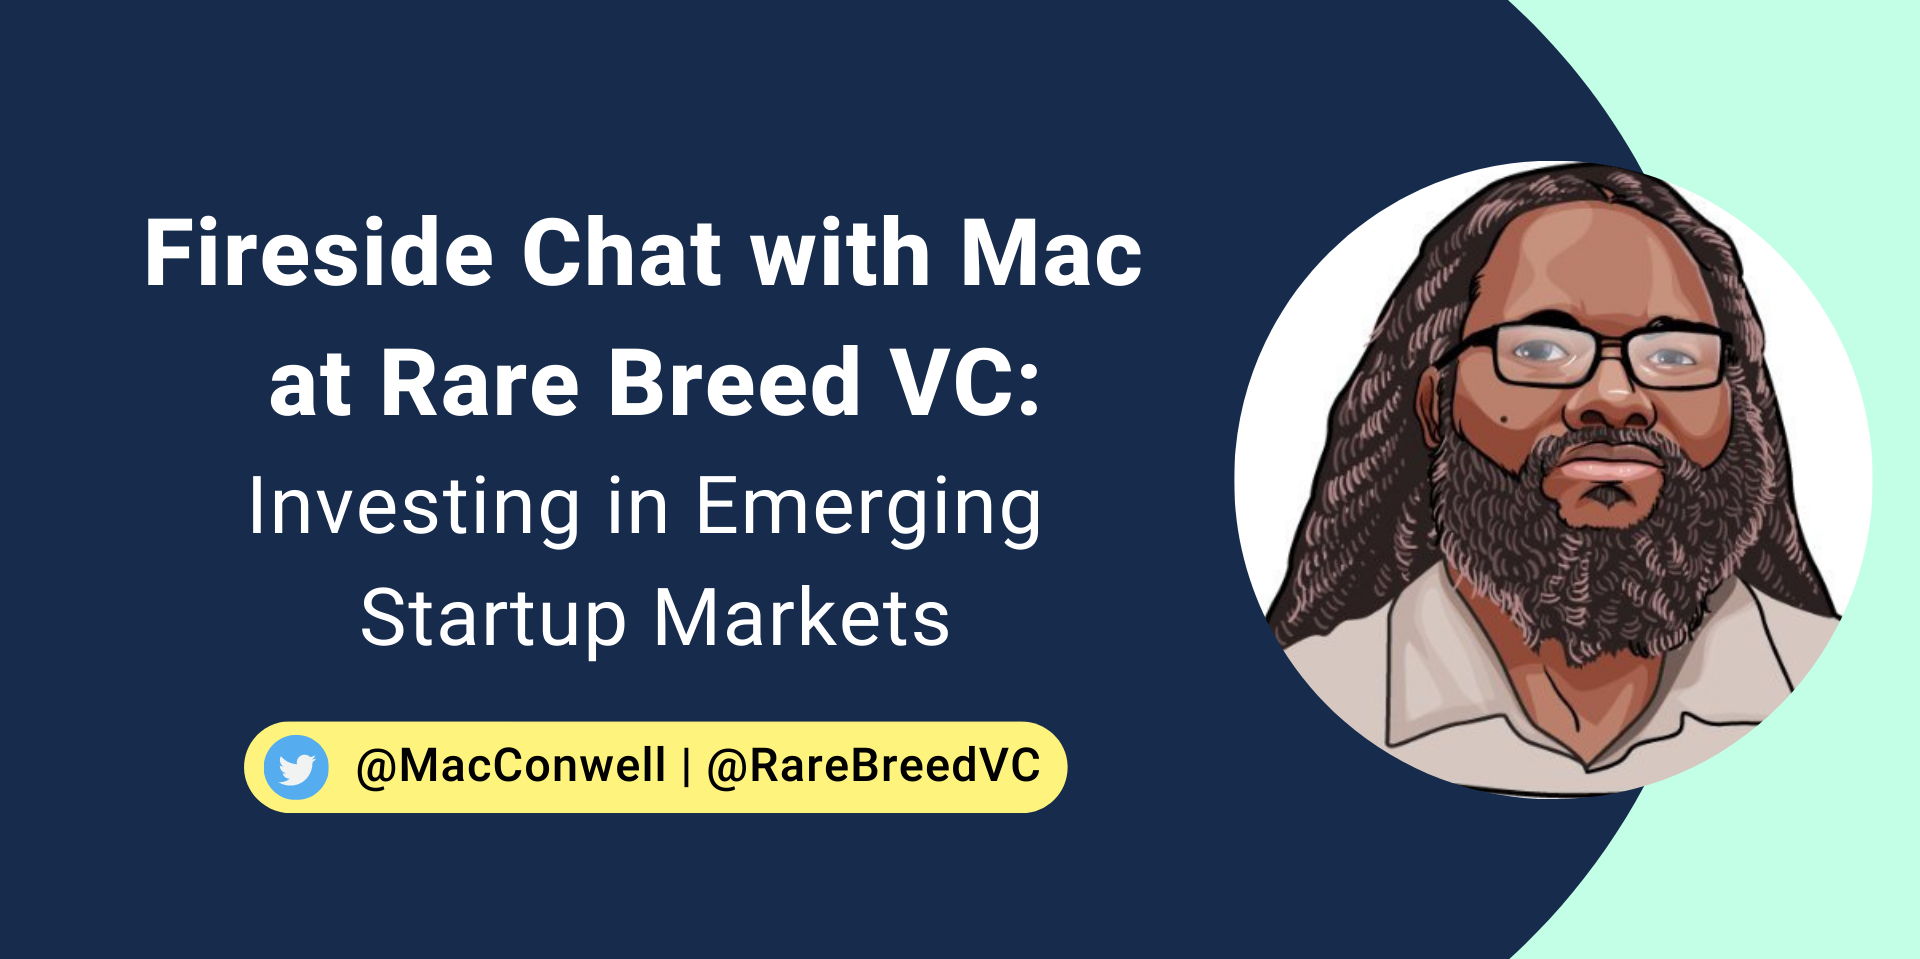 Fireside Chat with Mac Conwell: Investing in Emerging Startup Markets promotional image